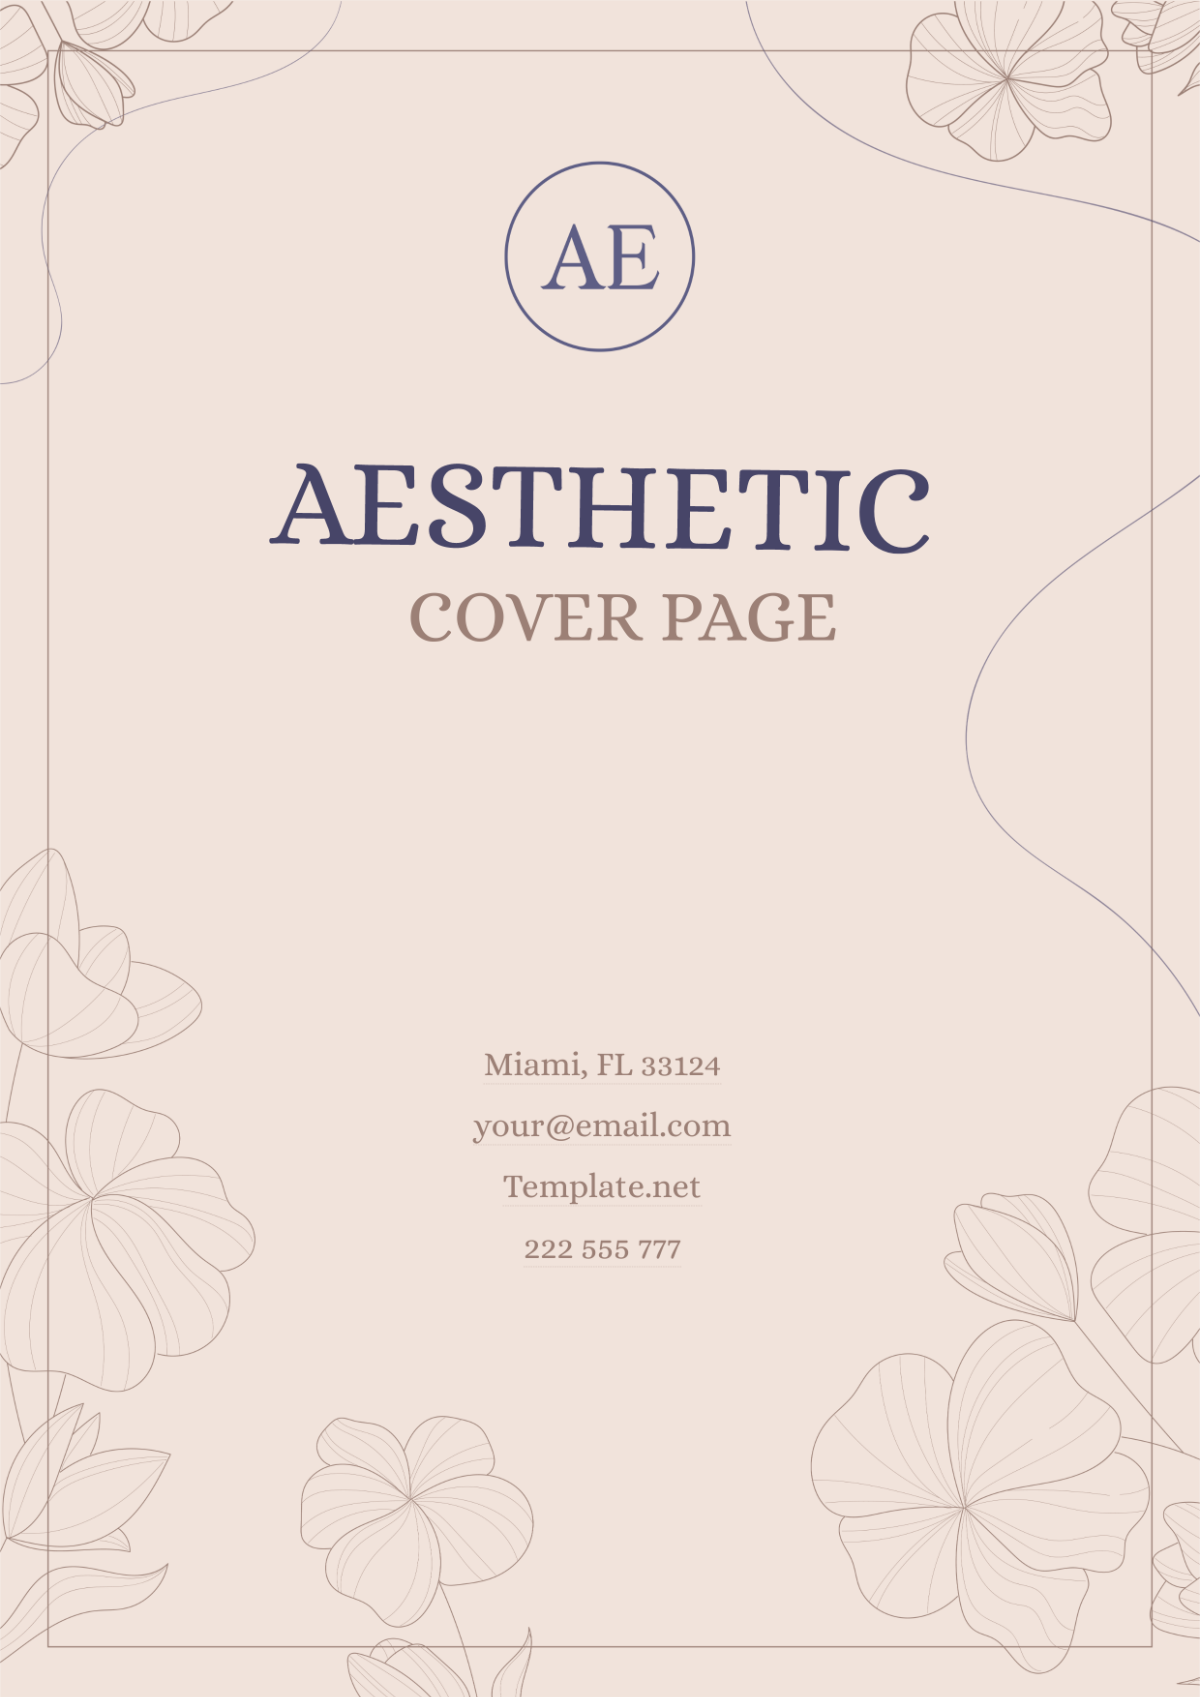 Aesthetic Cover Page Template